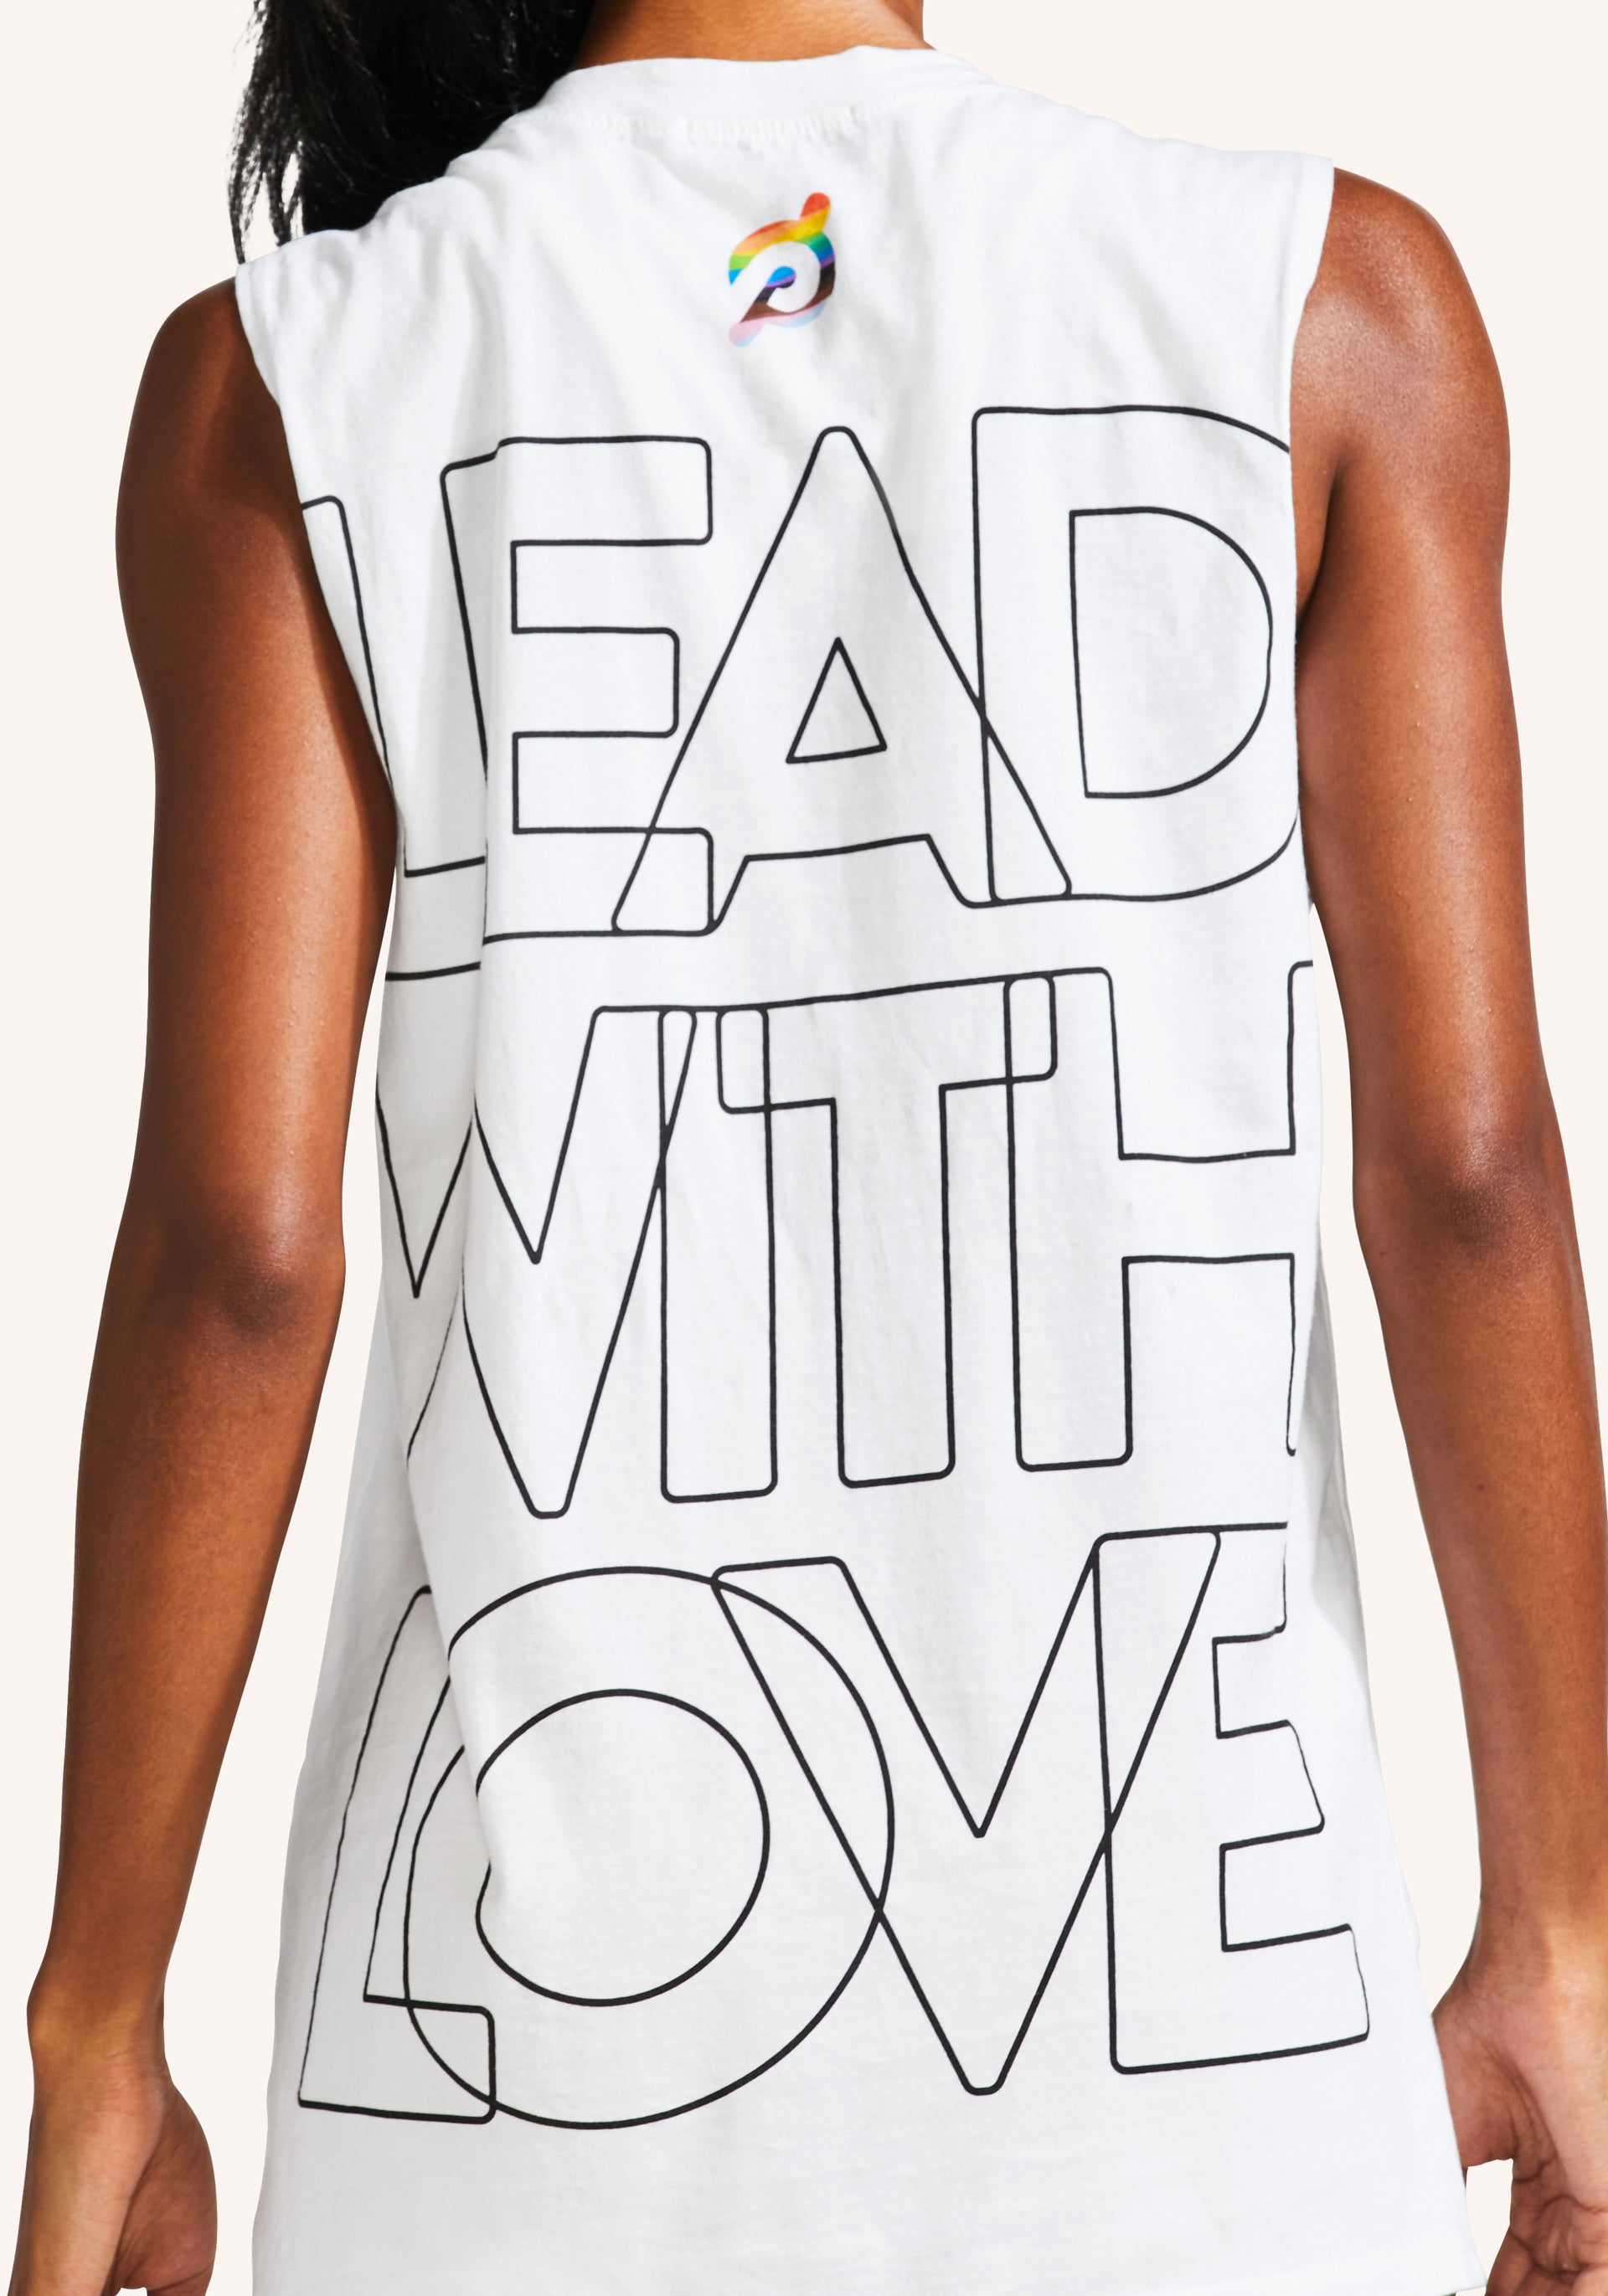 Lead With Love Unisex Muscle Tank (White)